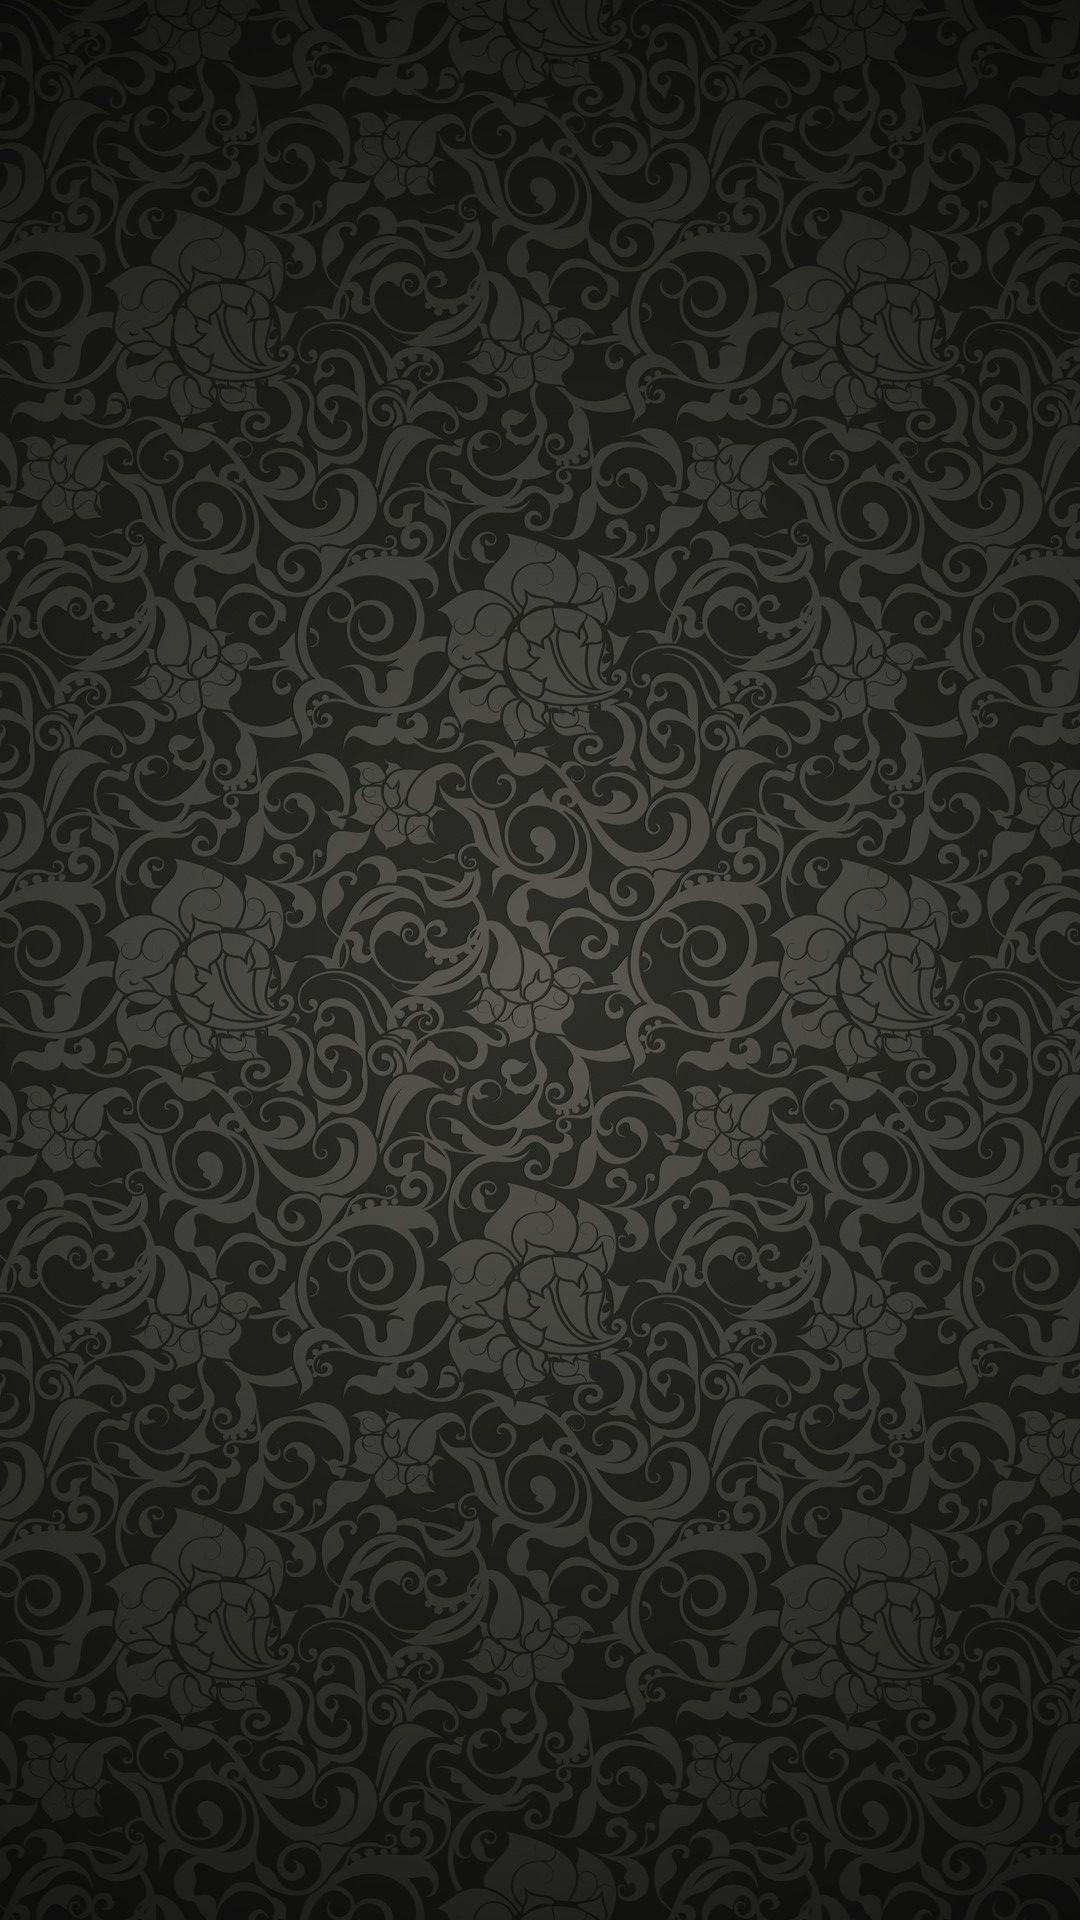 Paisley Iphone Wallpapers Top Free Paisley Iphone Backgrounds Wallpaperaccess 4255